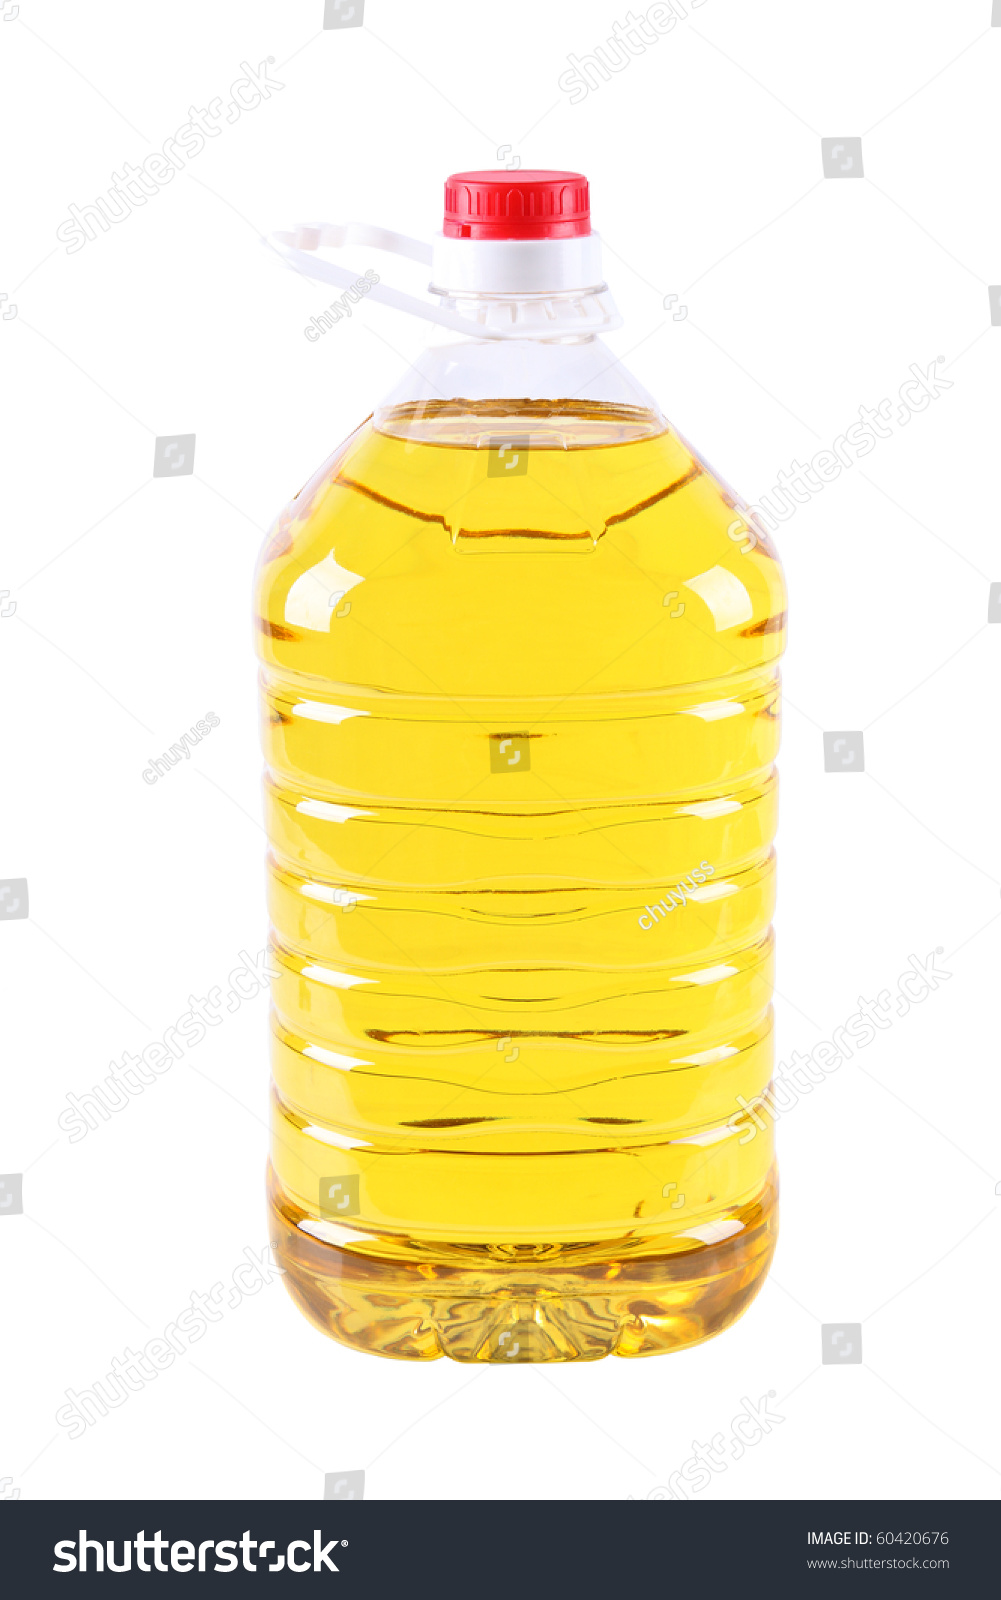 cooking oil clipart - photo #41